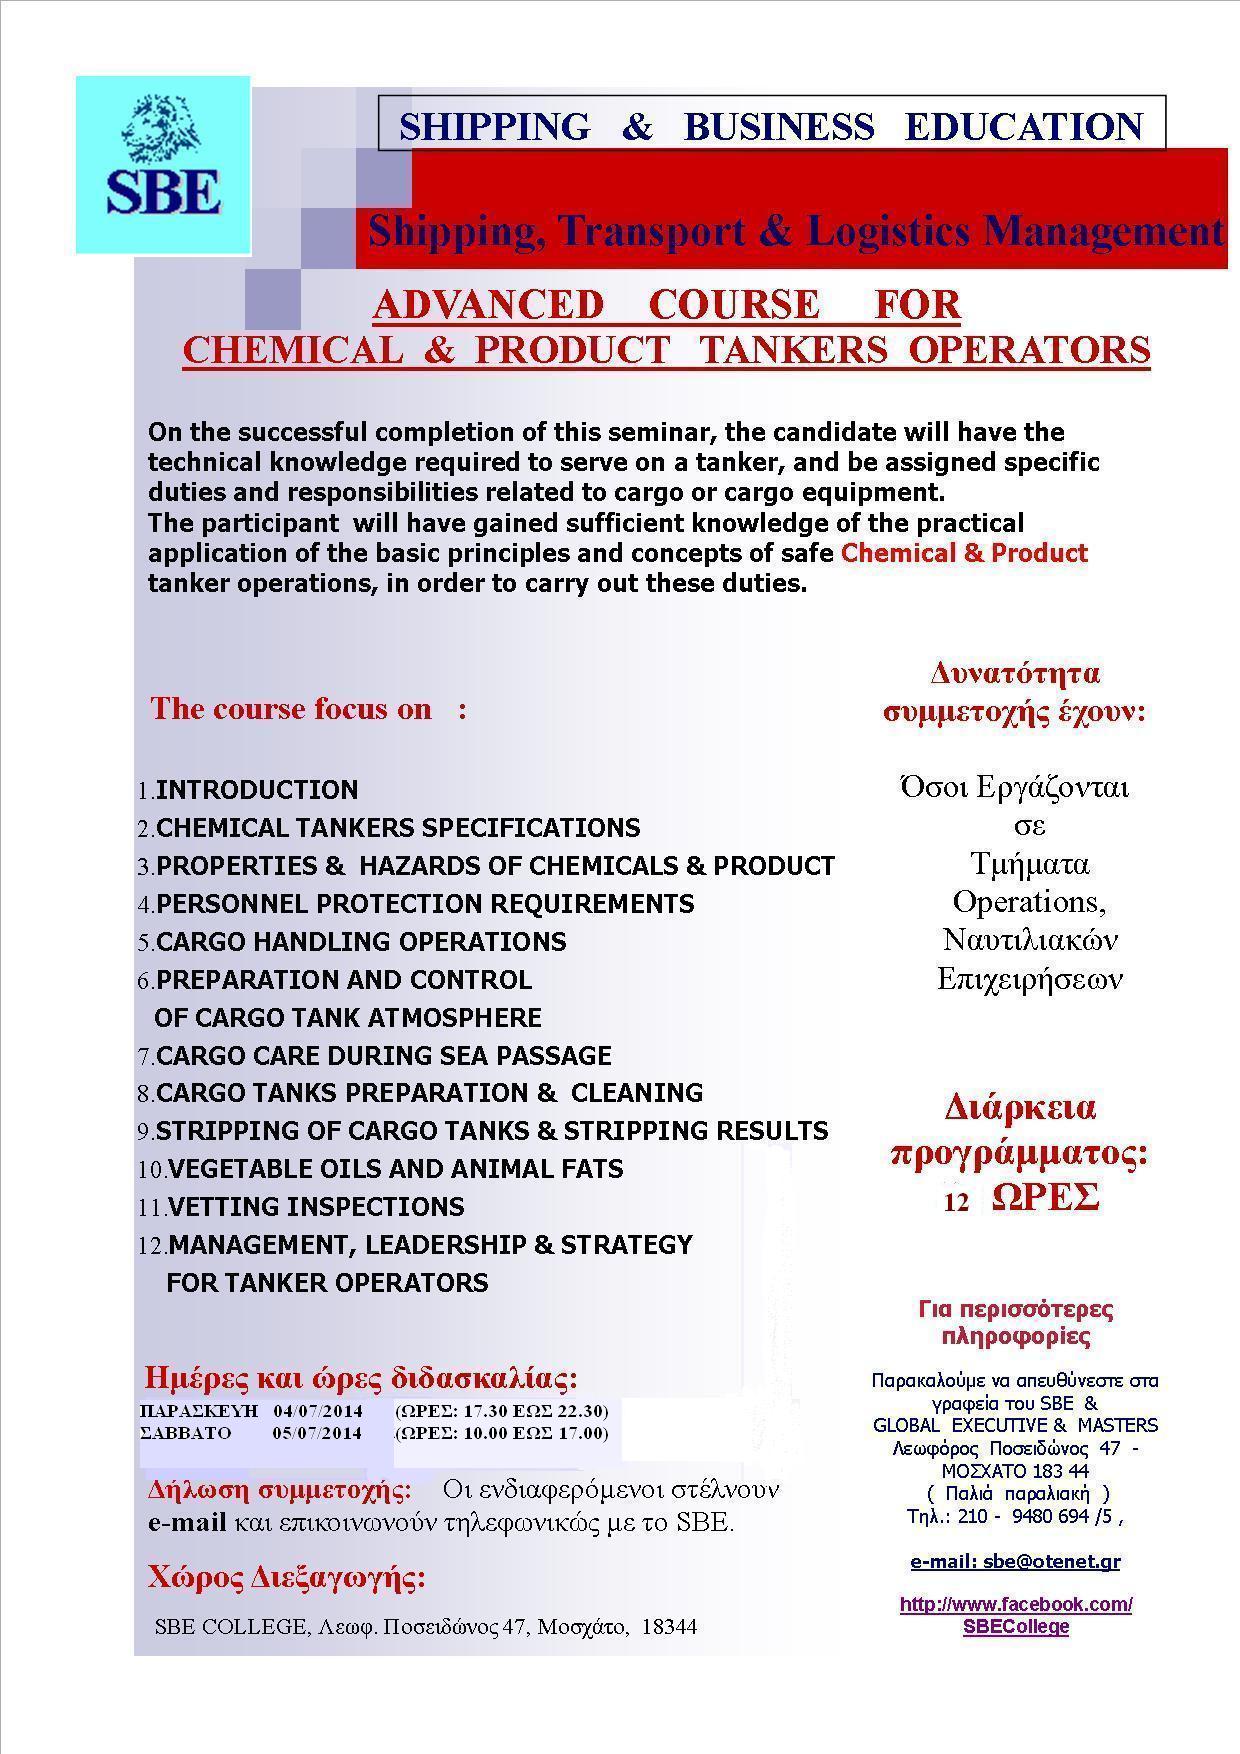 SBE – Advanced course for Chemical Product Tankers Operators